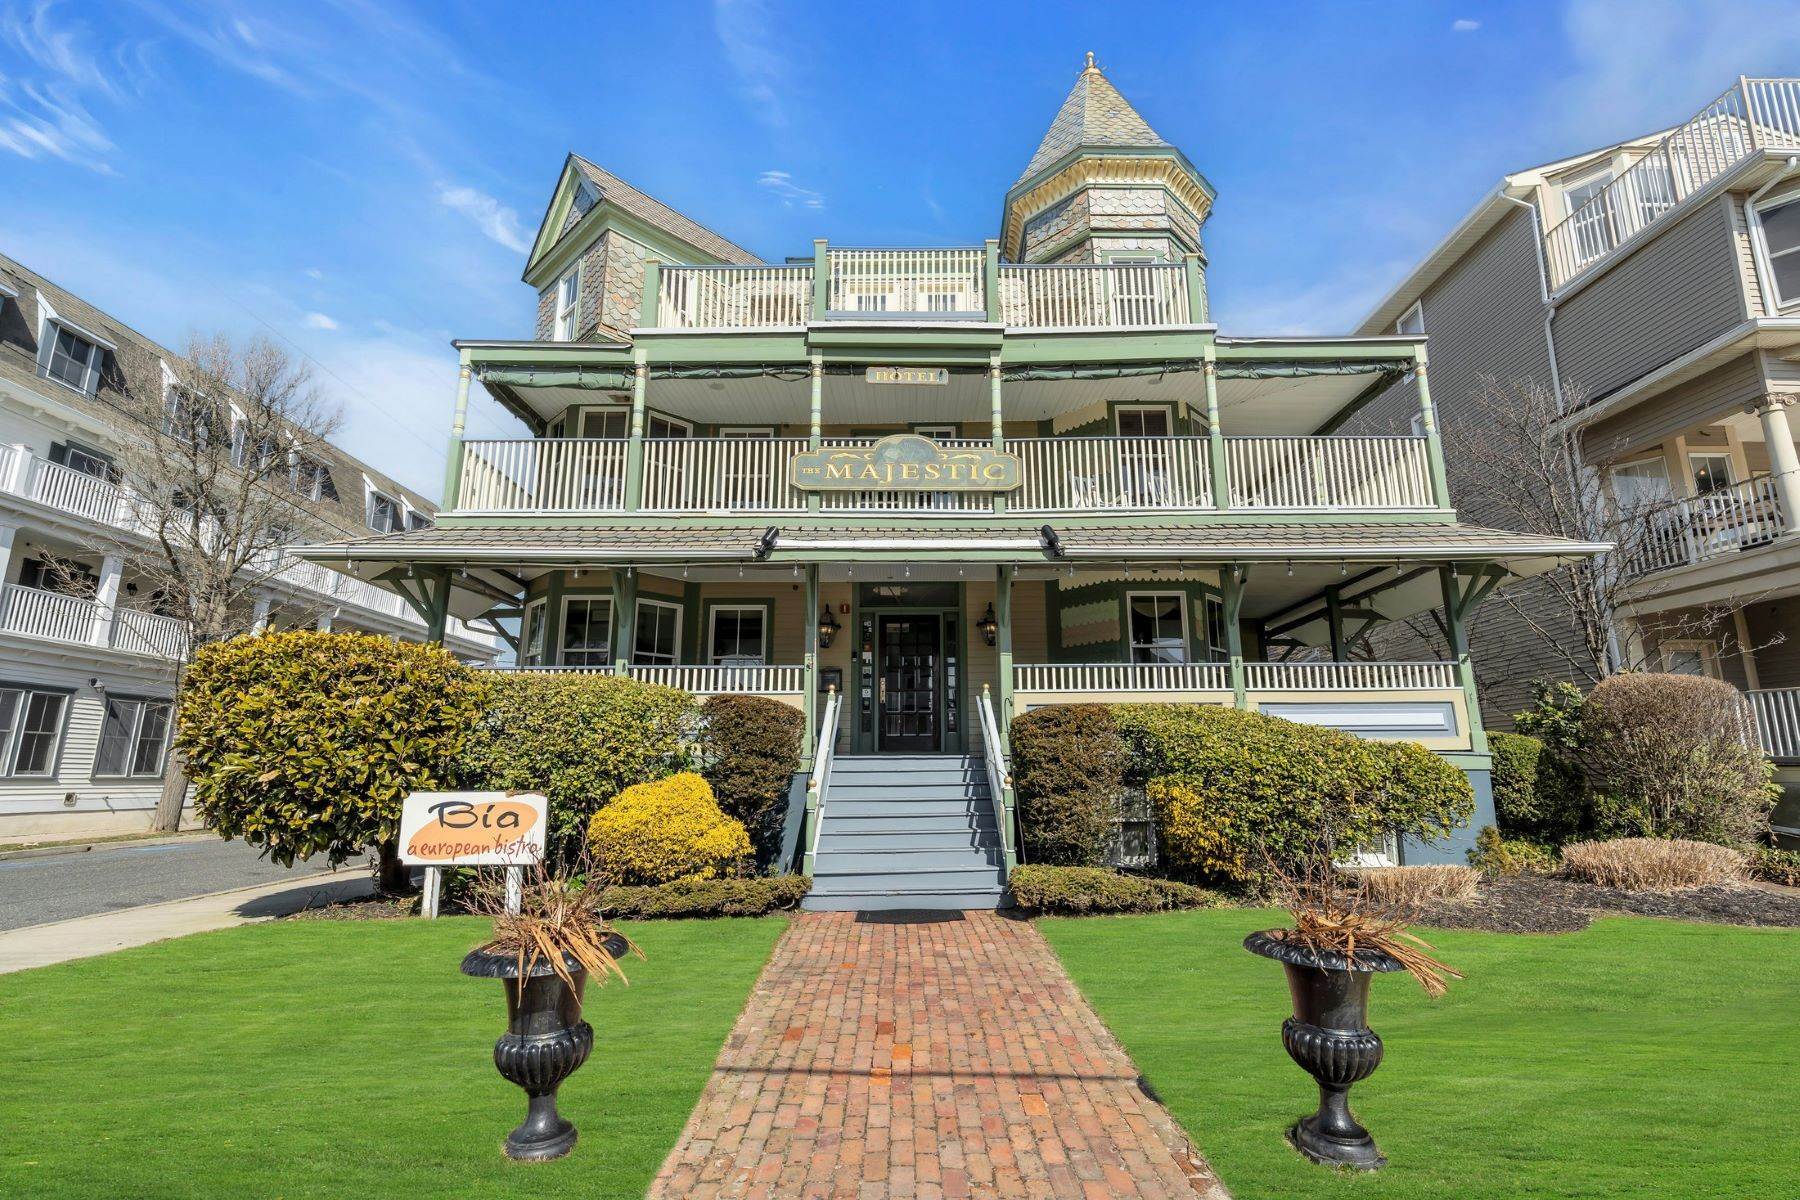 Bed and Breakfast Homes للـ Sale في The Majestic Hotel 19 Main Avenue, Neptune, New Jersey 07756 United States